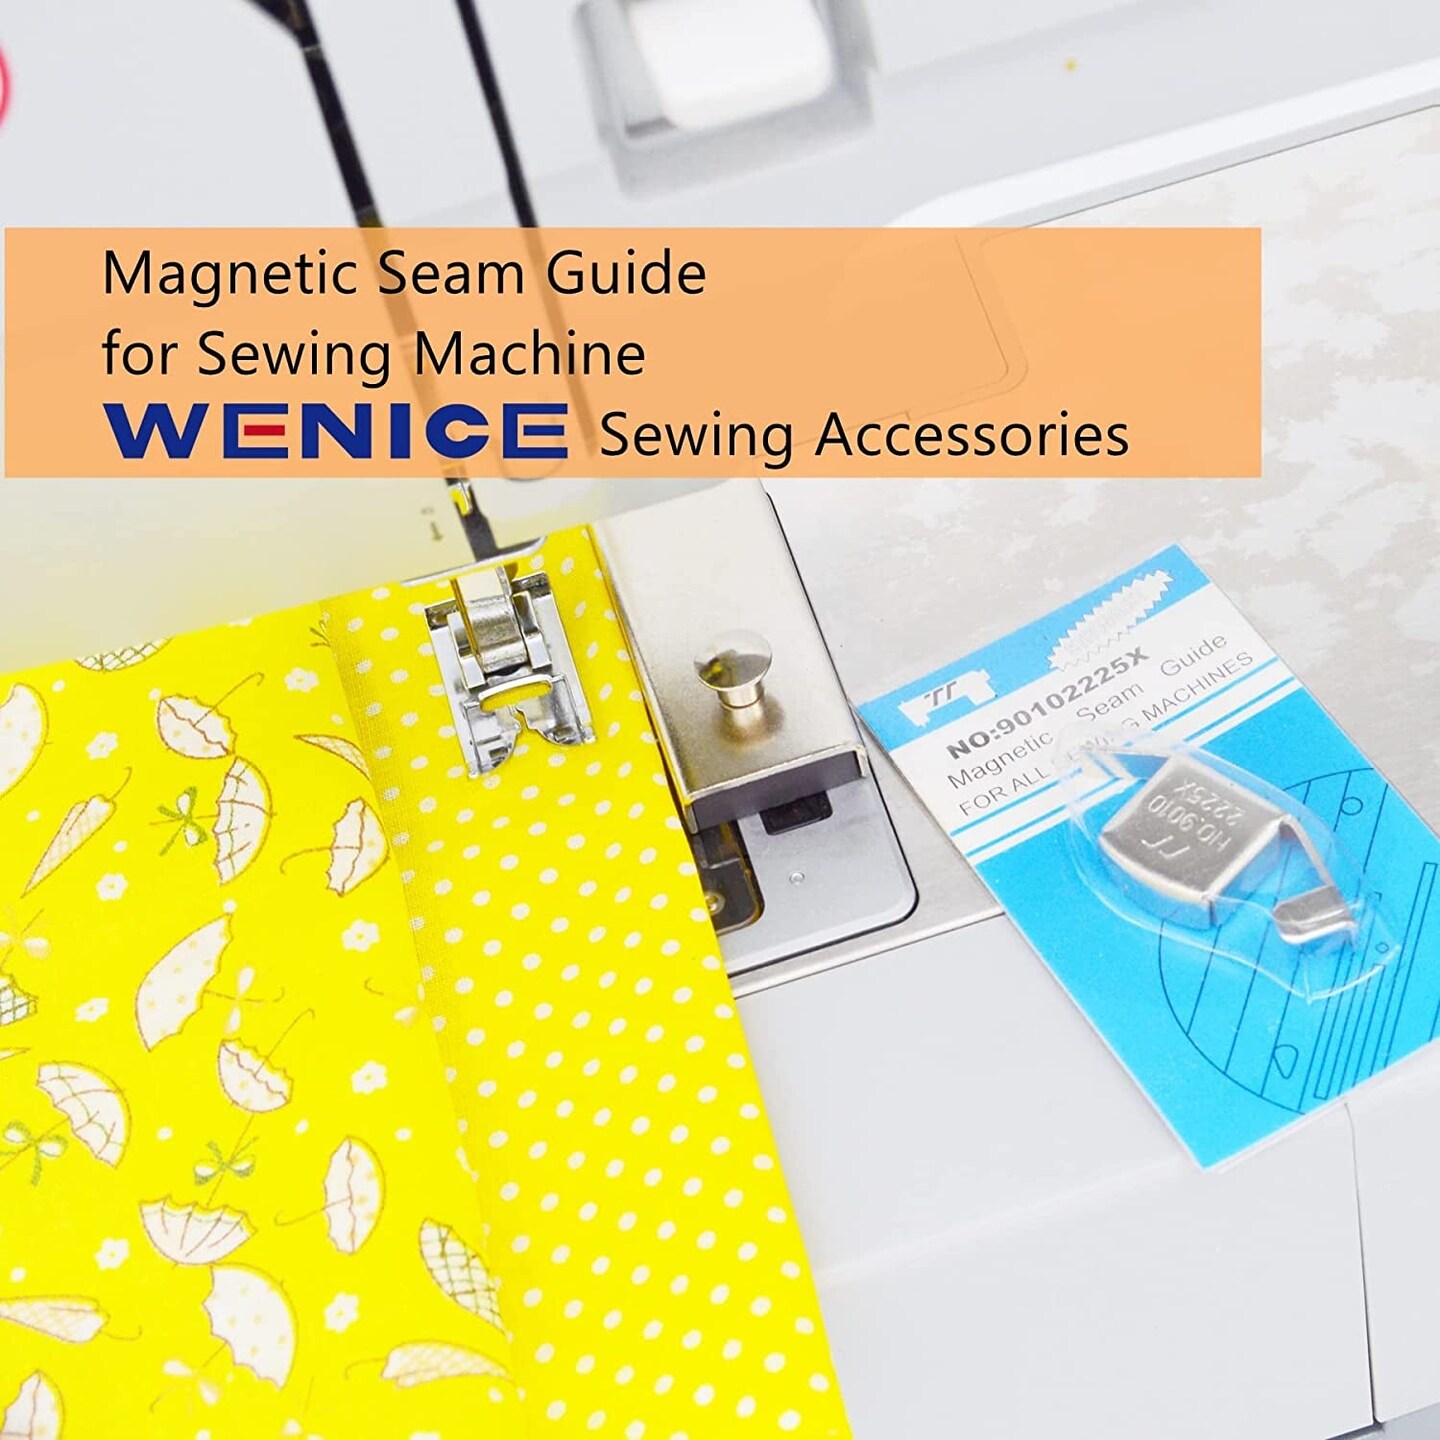 Universal MG1 Magnetic Seam Guide – Keep Sewn Lines Straight & Edges Tight  with This Heavy Duty Steel Magnet Mounted Strait-Edge Guide for Sewing 